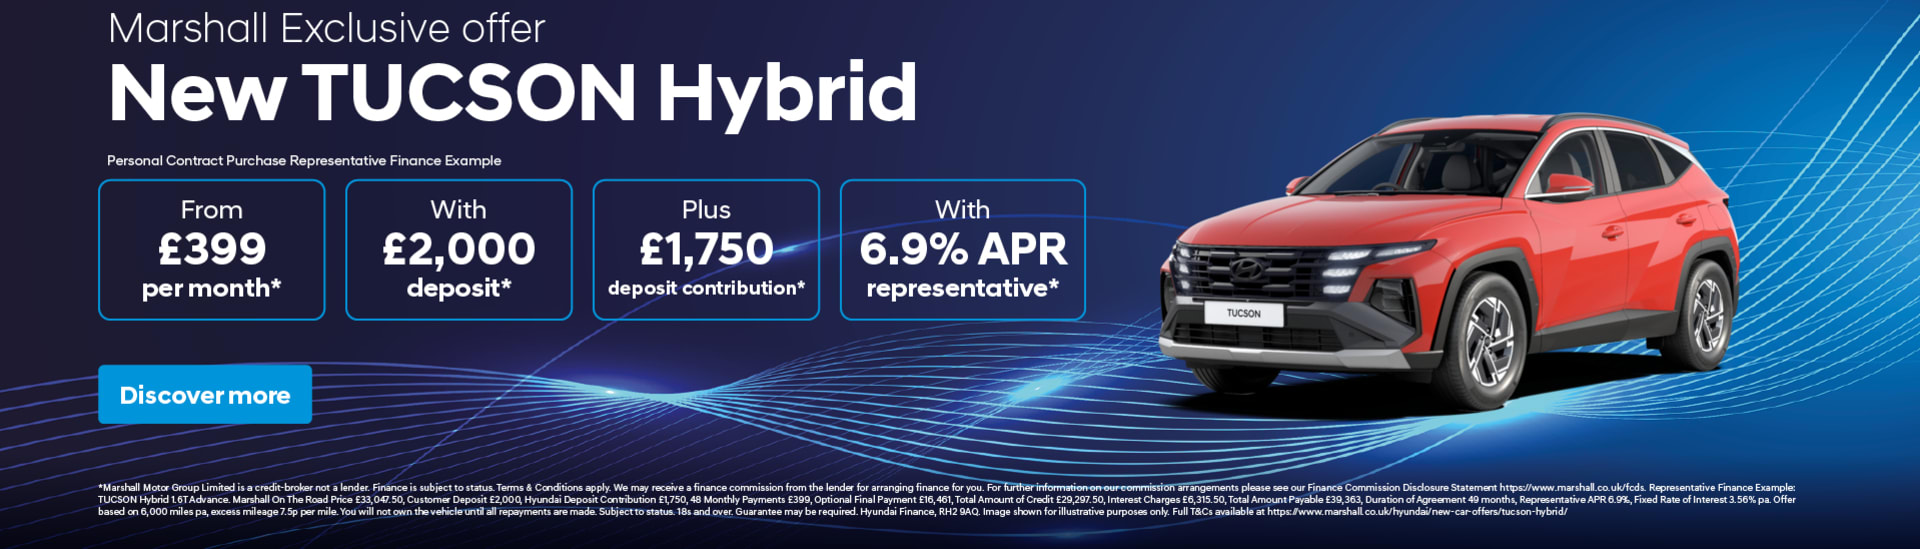 Hyundai TUCSON Hybrid Personal Contract Purchase Exclusive Offer